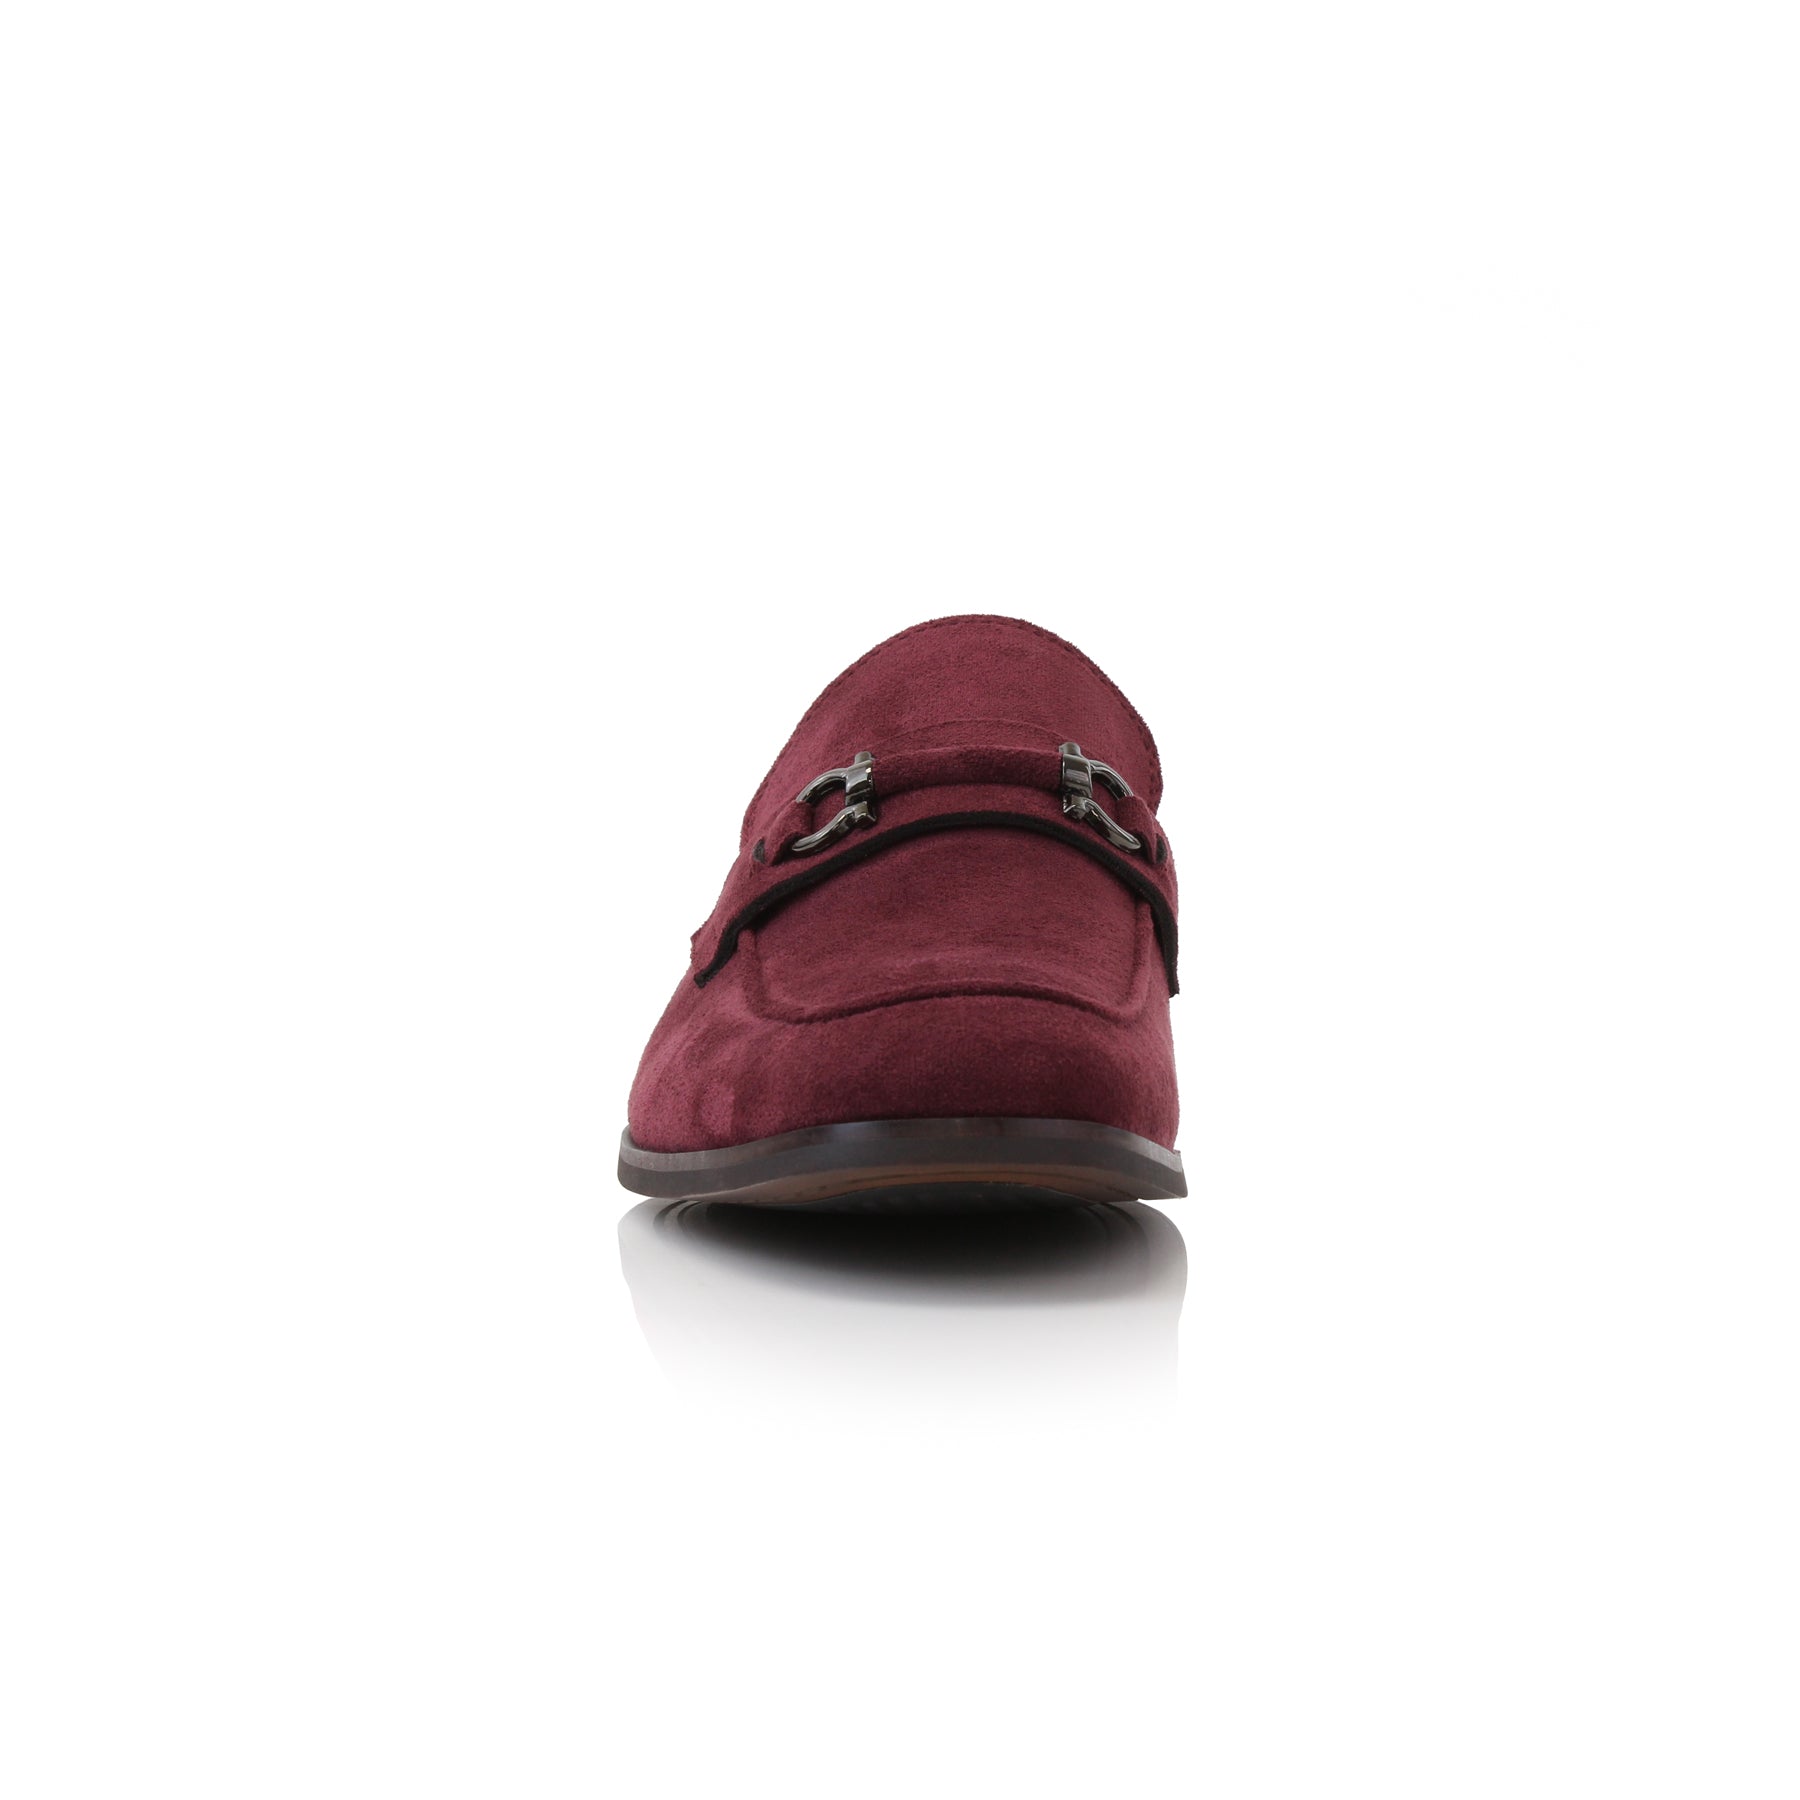 Metal Buckle Suede Loafers | Demitri by Ferro Aldo | Conal Footwear | Front Angle View